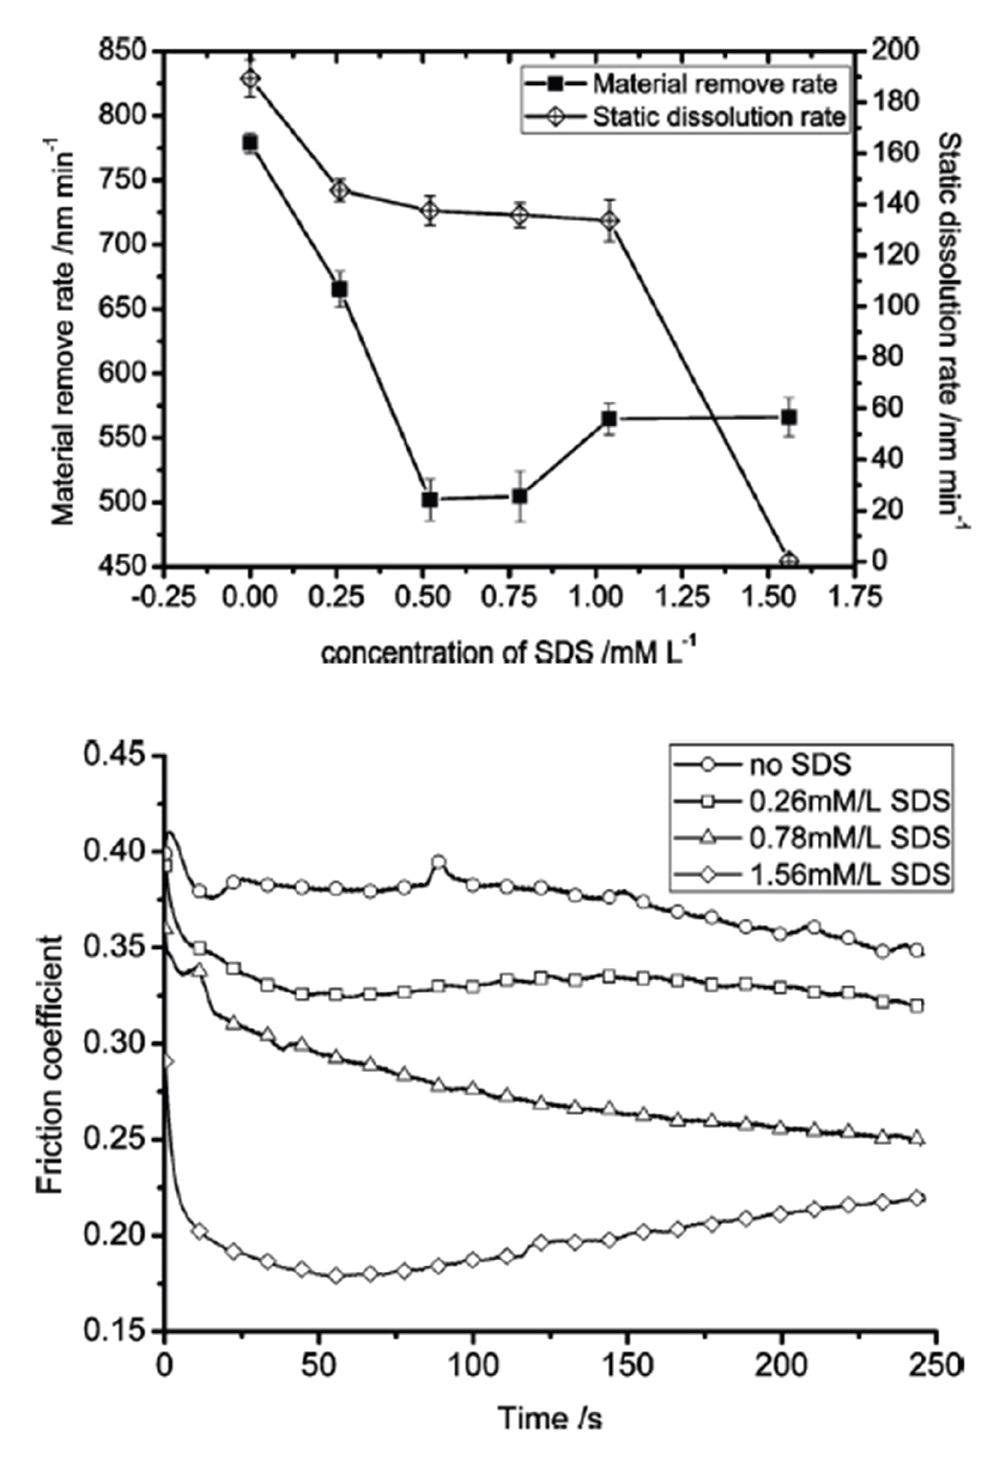 The effect of sodium dodecyl sulfate (SDS) concentration on static dissolution rate and removal rate; polishing copper (top). COF variation with time for different SDS concentrations; polishing copper (bottom).